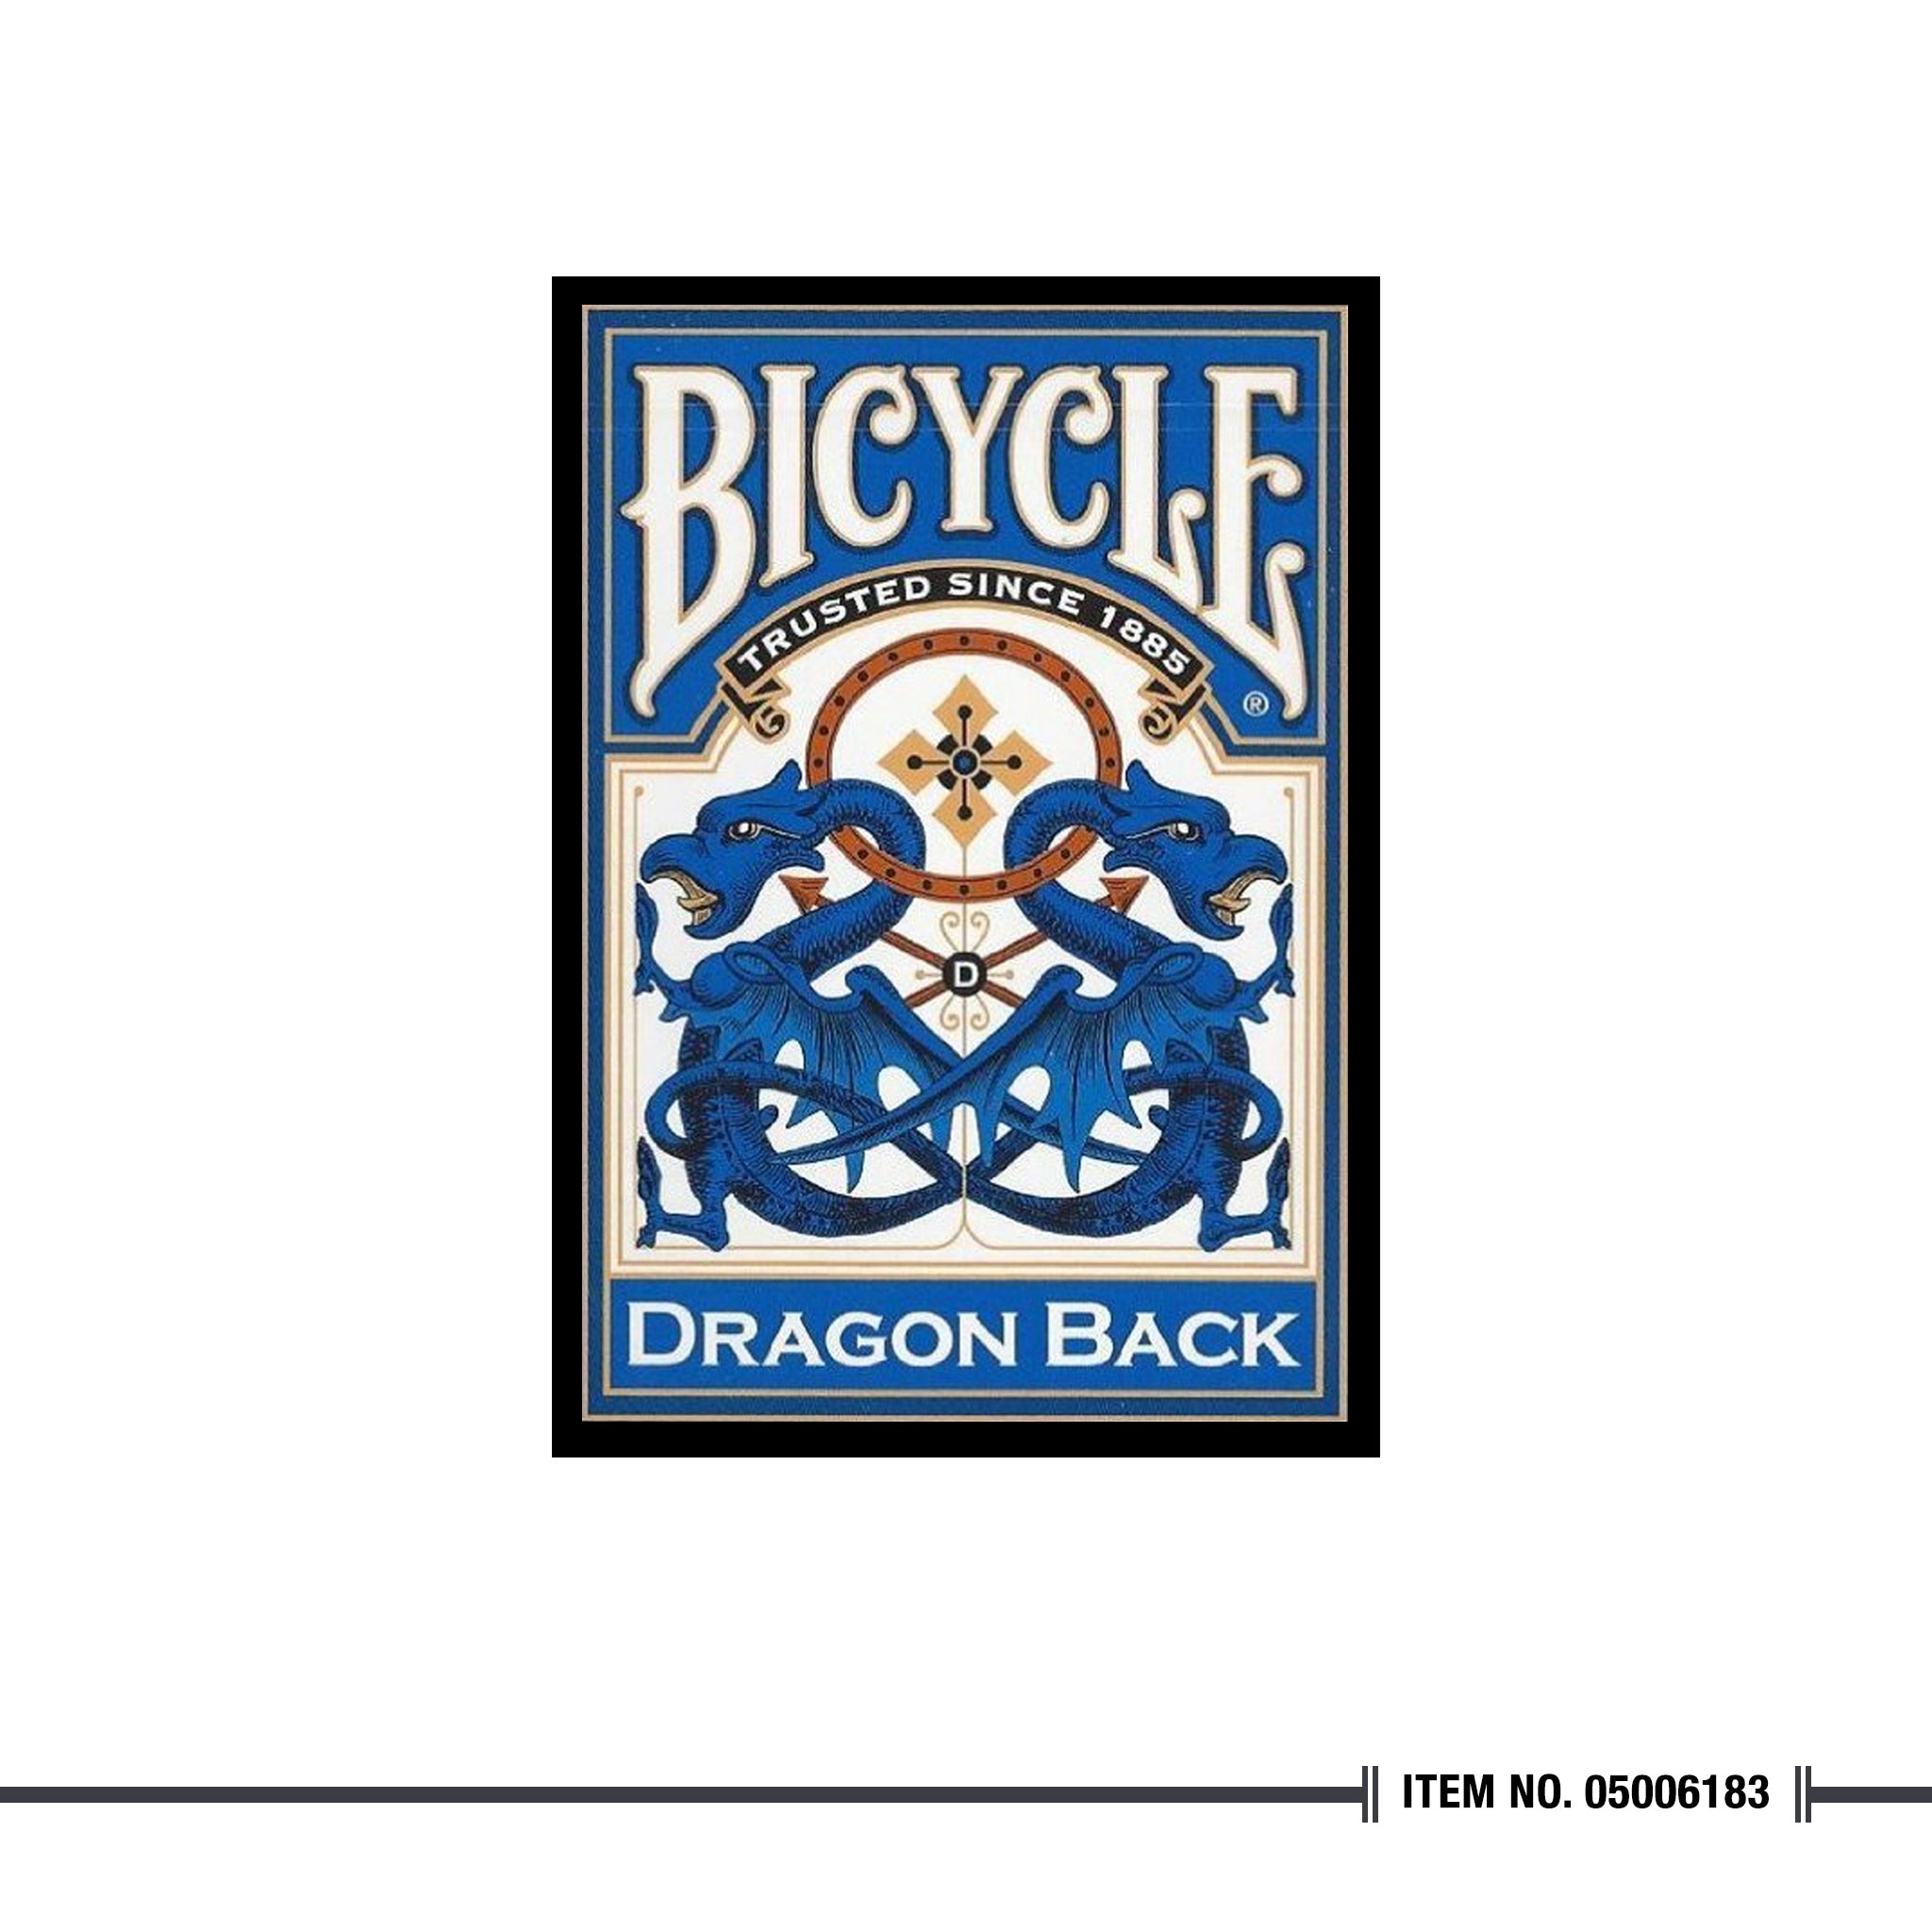 Bicycle® Dragon Back Playing Cards